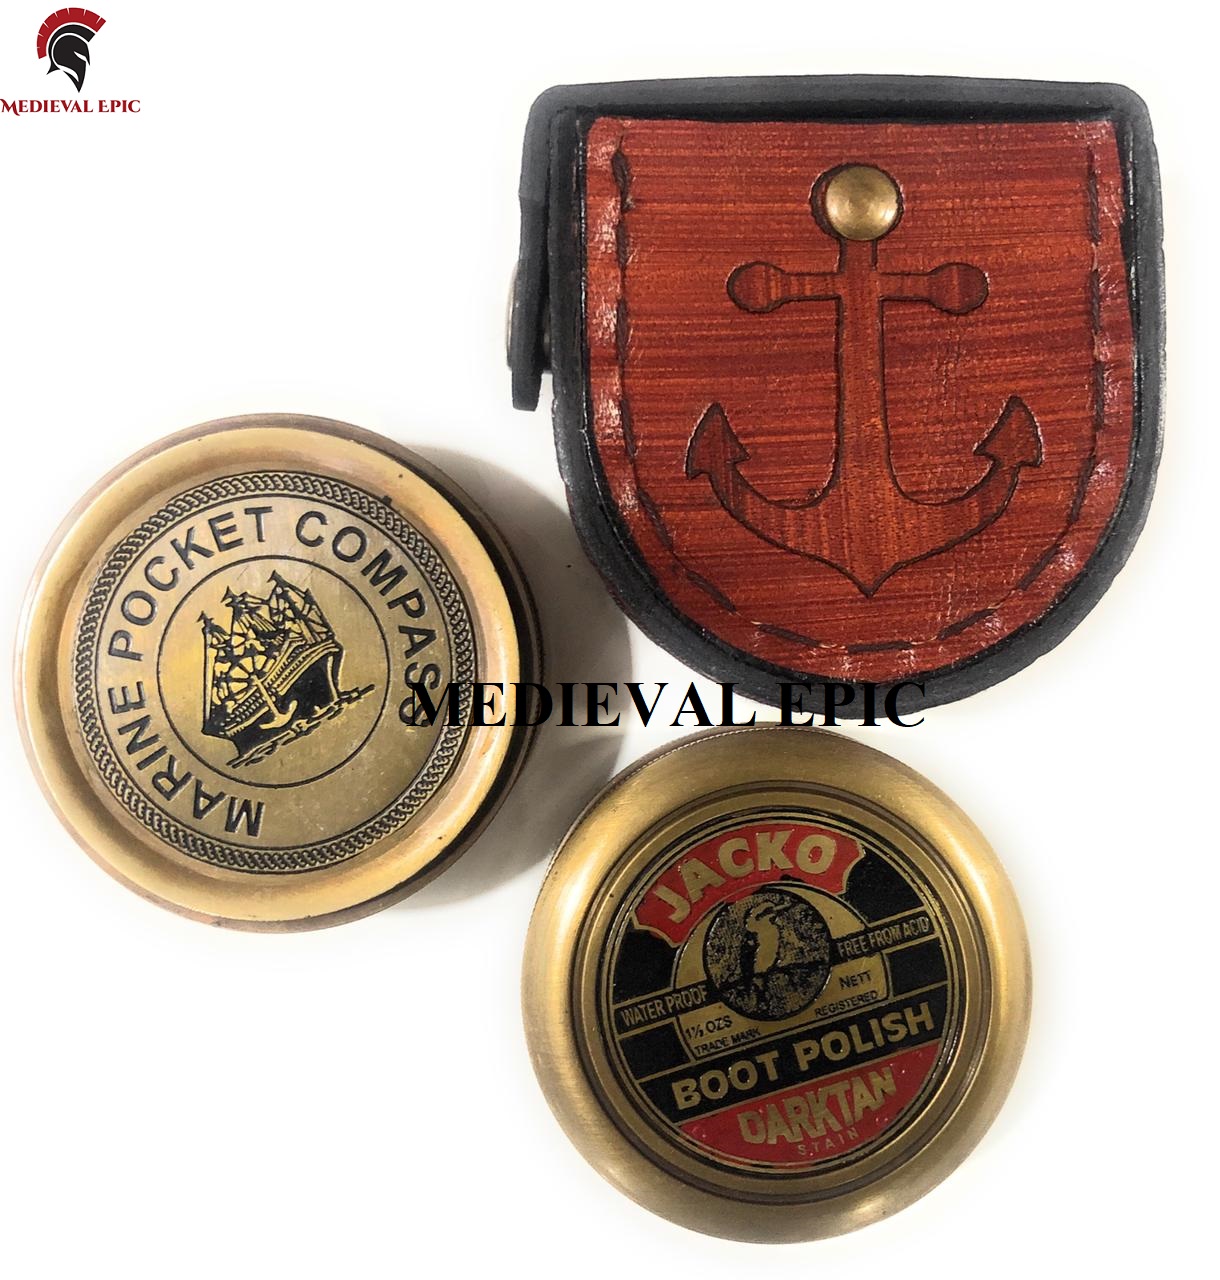 Details about   Antique JACKO BOOT POLISH Marine Pocket Brass Compass Engraved Inside the Lid 